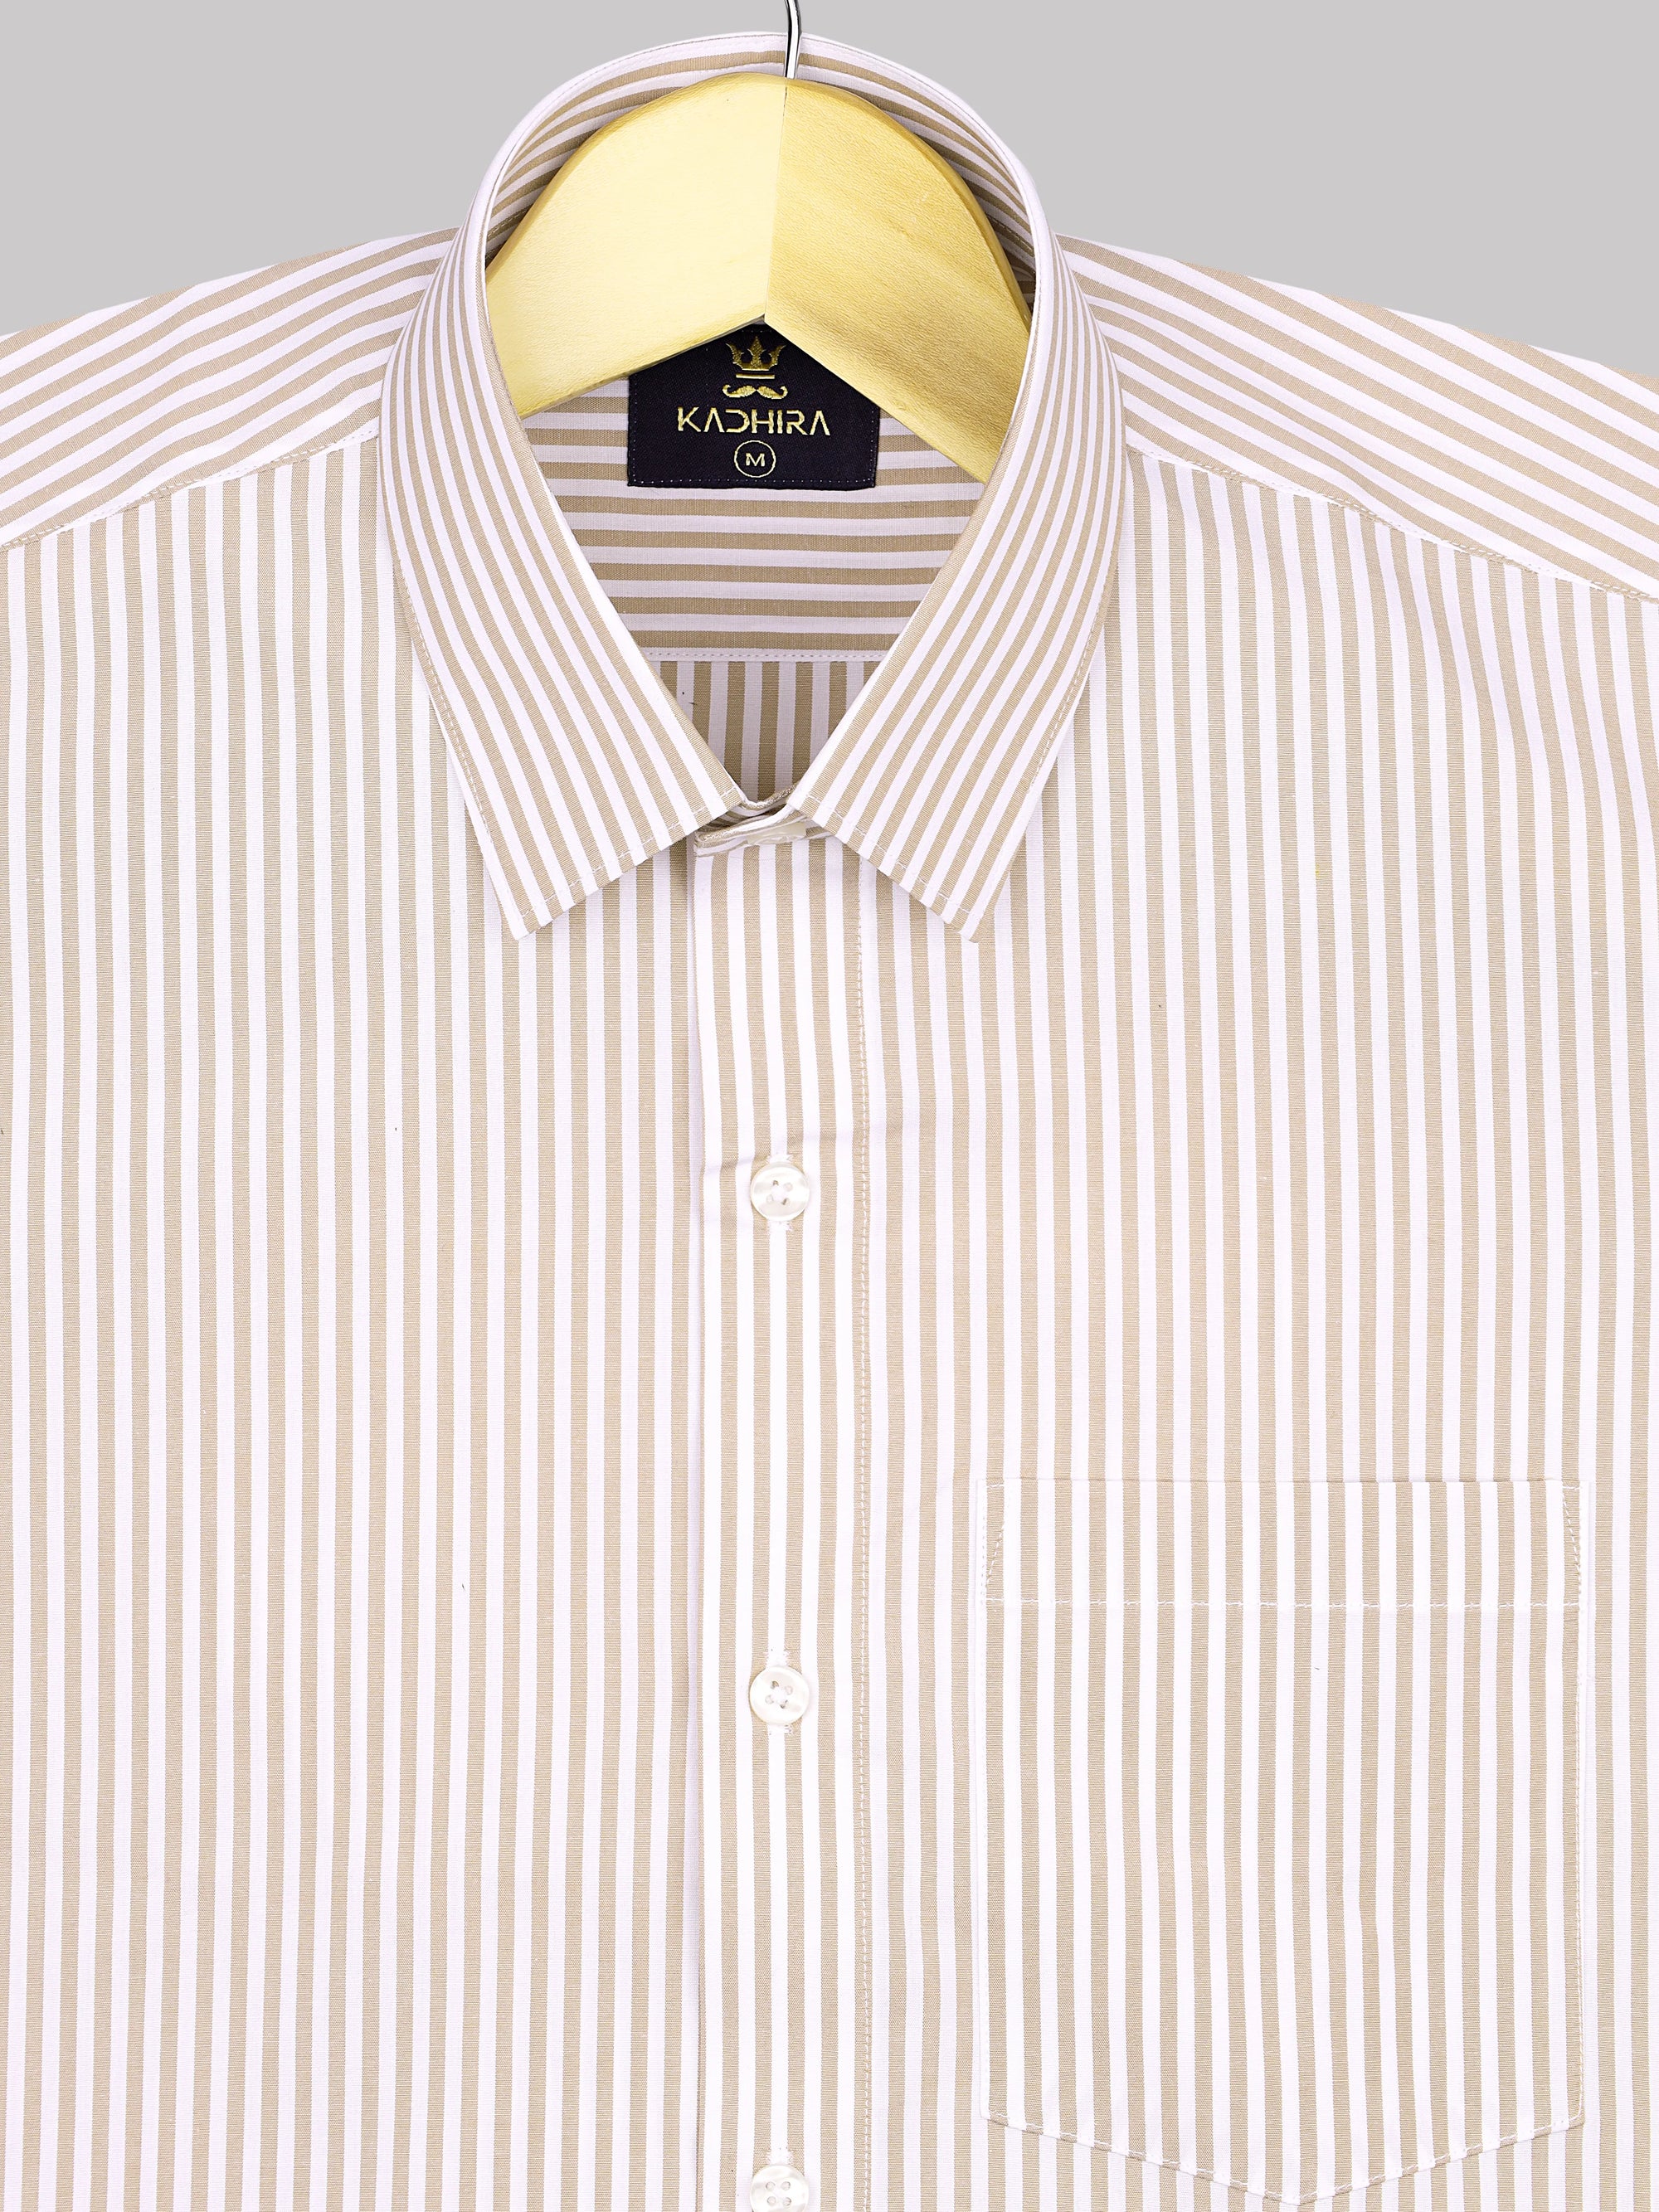 Millennial Pink With White Candy Striped Premium Cotton Shirt